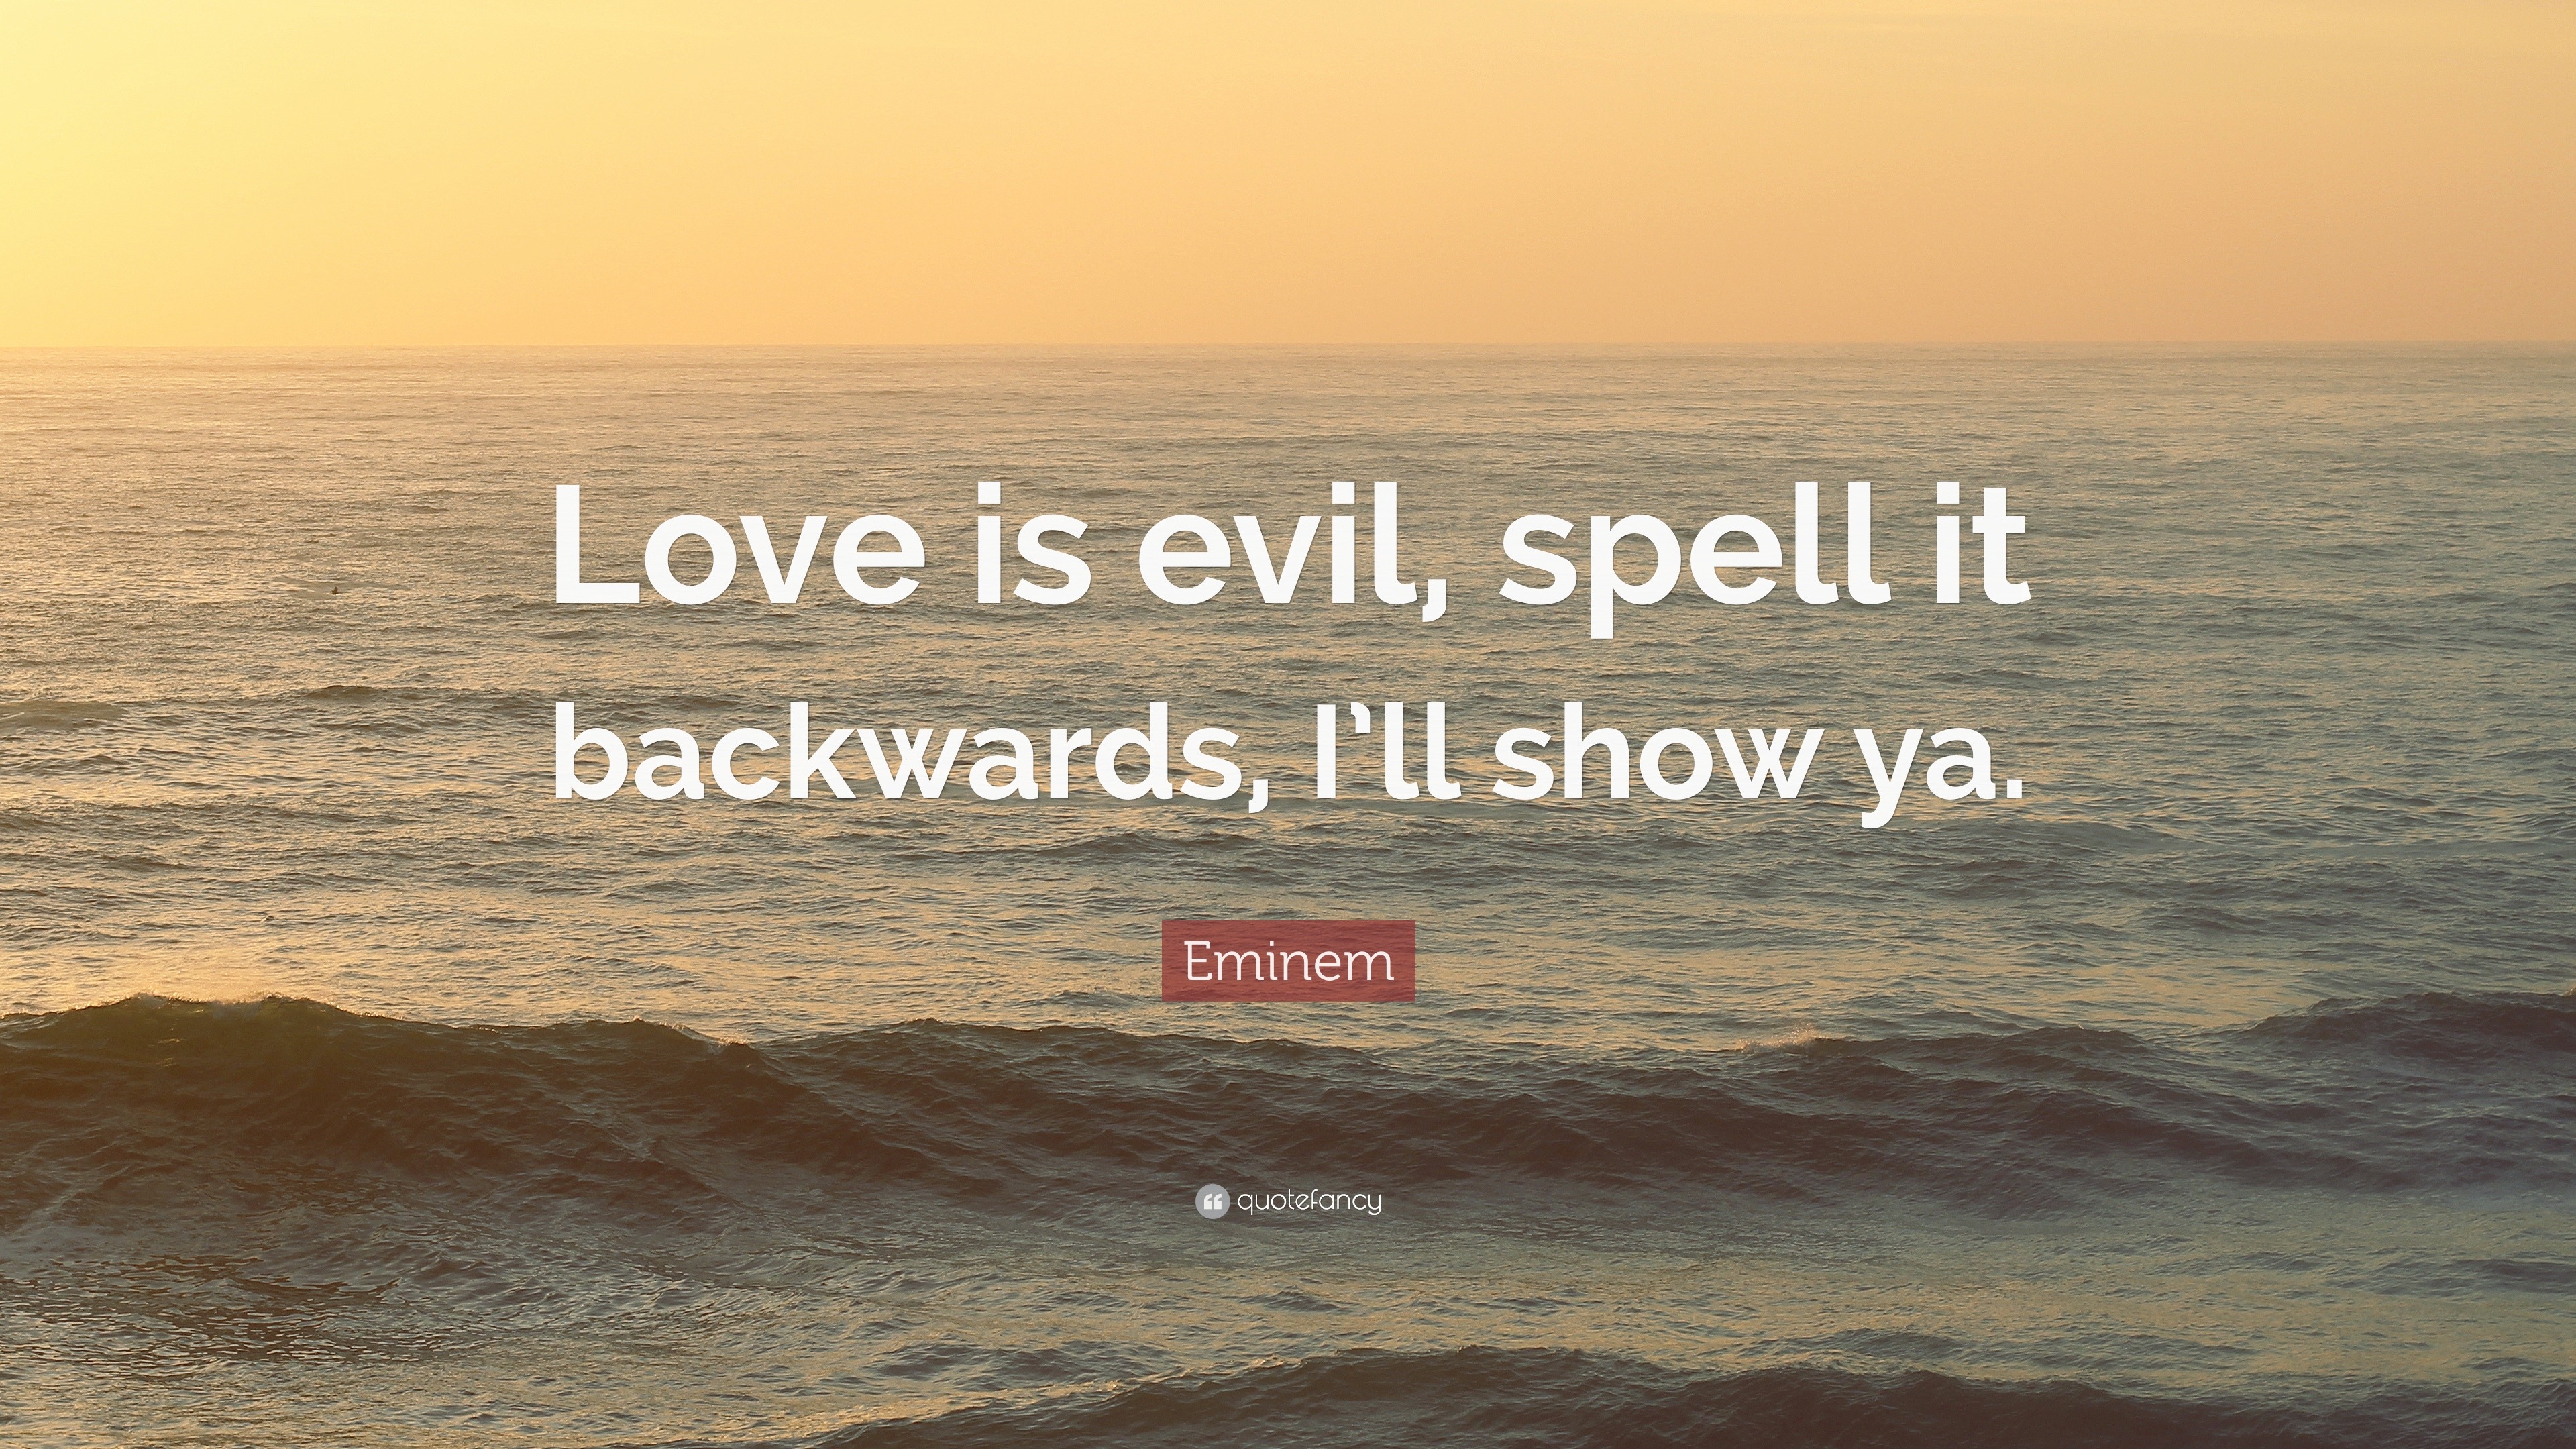 Eminem Quote “Love is evil spell it backwards I ll show